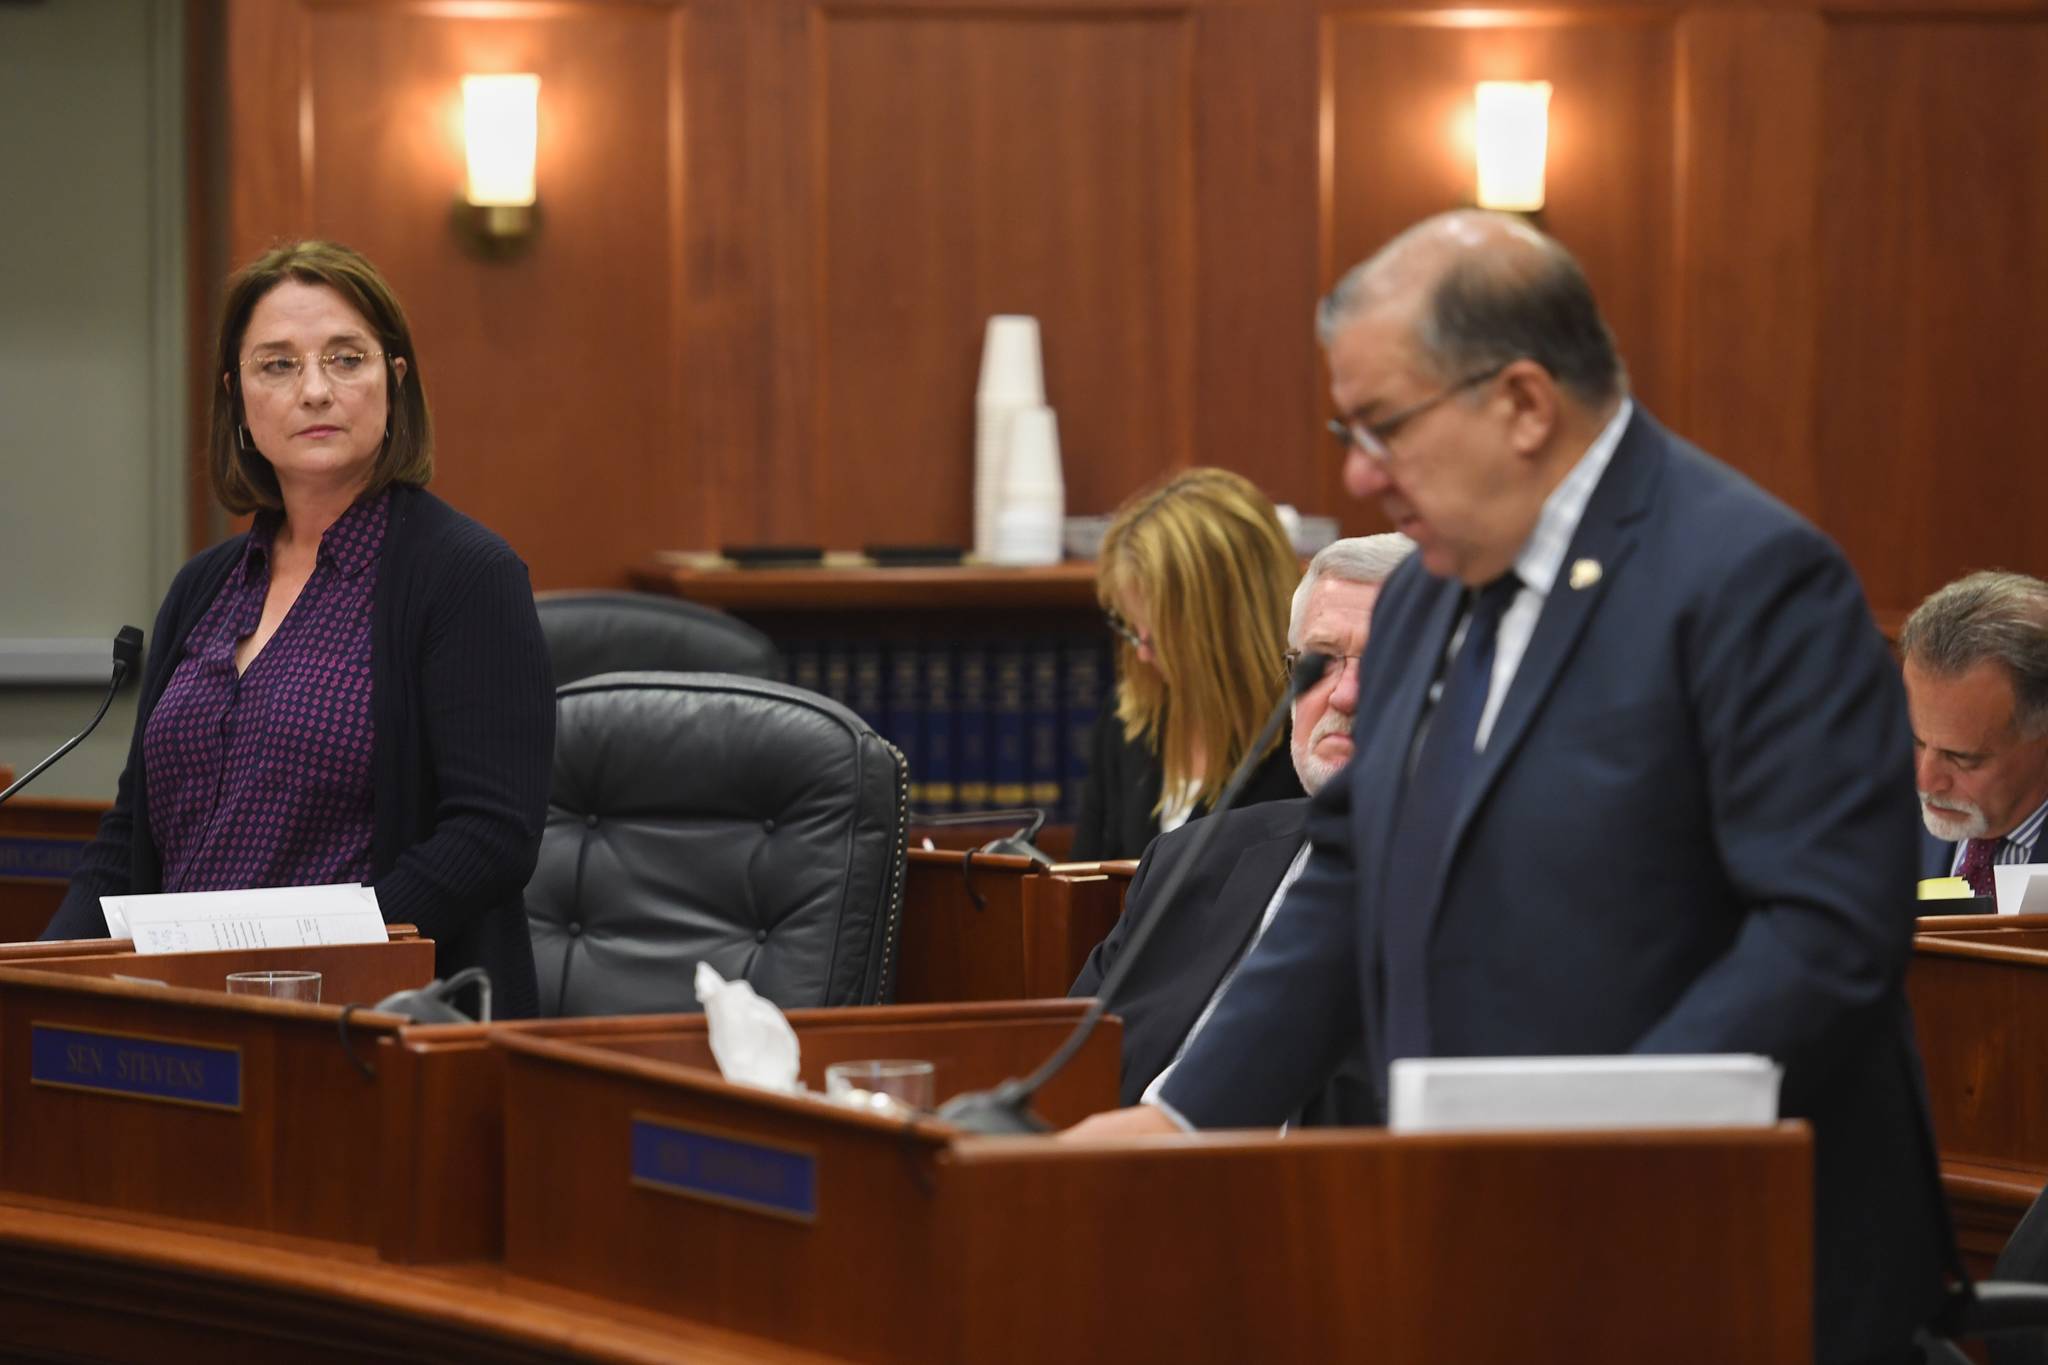 Sen. Lora Reinbold, R-Eagle River, watches as Senate Majority Leader Lyman Hoffman, R-Bethel, interrupts with a “point of order” during debate on the operating budget at the Capitol on Monday, July 29, 2019. (Michael Penn | Juneau Empire)